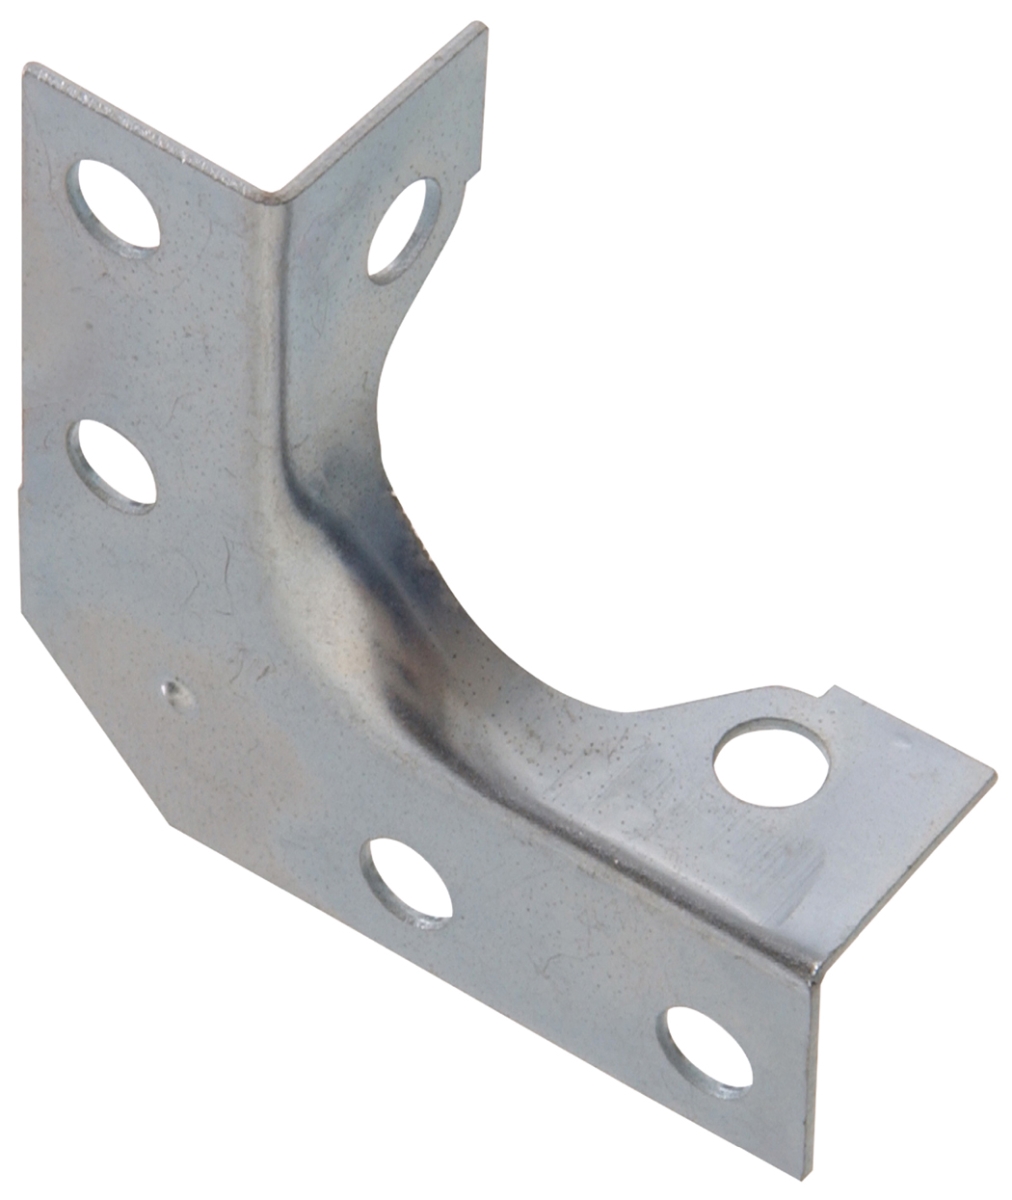 UPC 008236930733 product image for 852188 Carded - Zinc Outside Corner Braces, 4 x 0.625 in. | upcitemdb.com